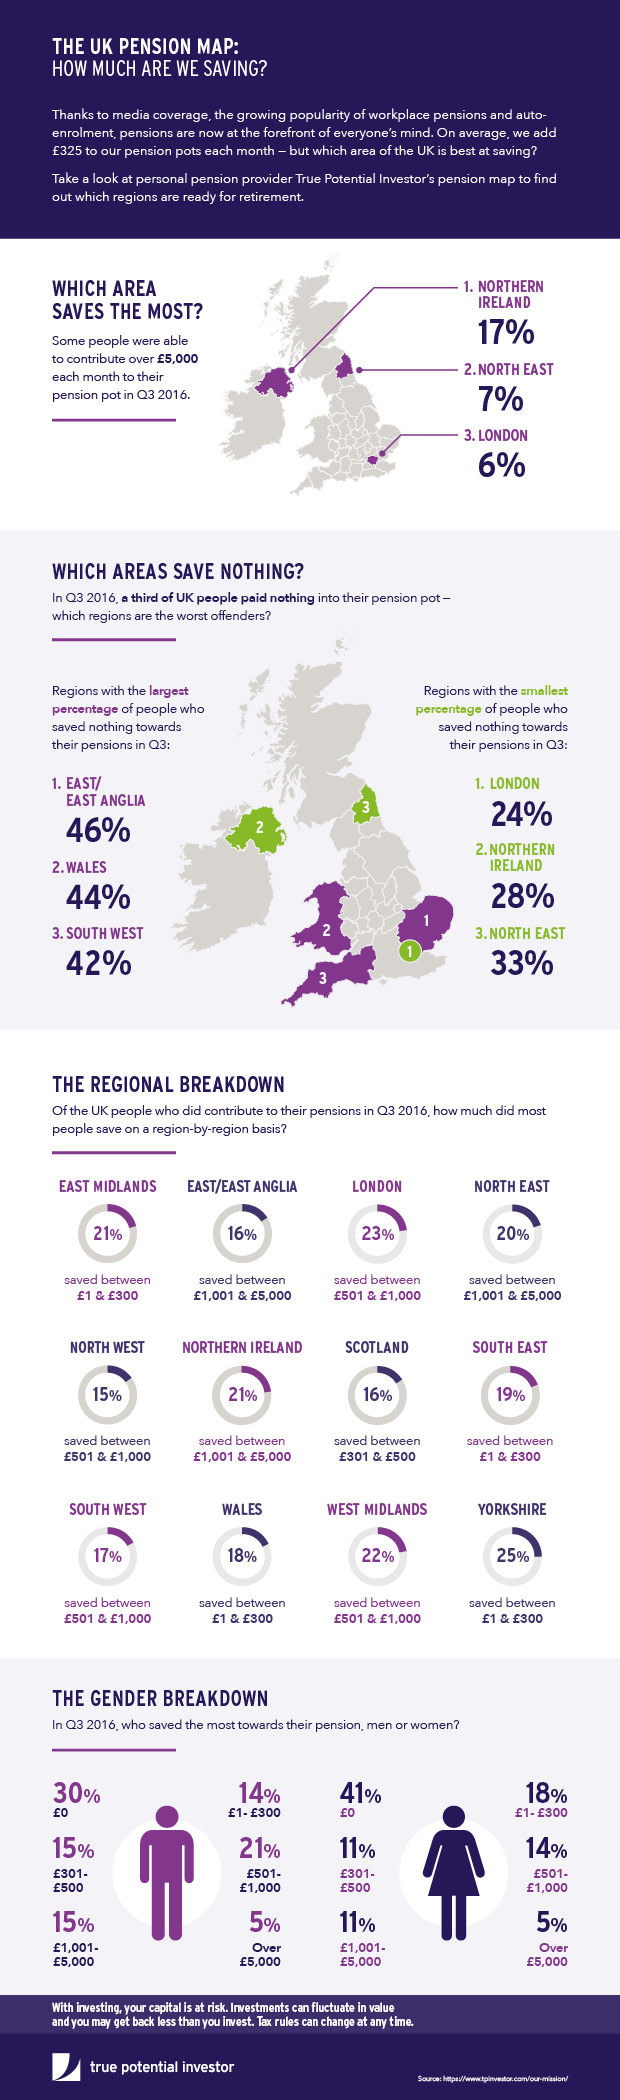 Pensions: How Much Is The UK Population Saving?